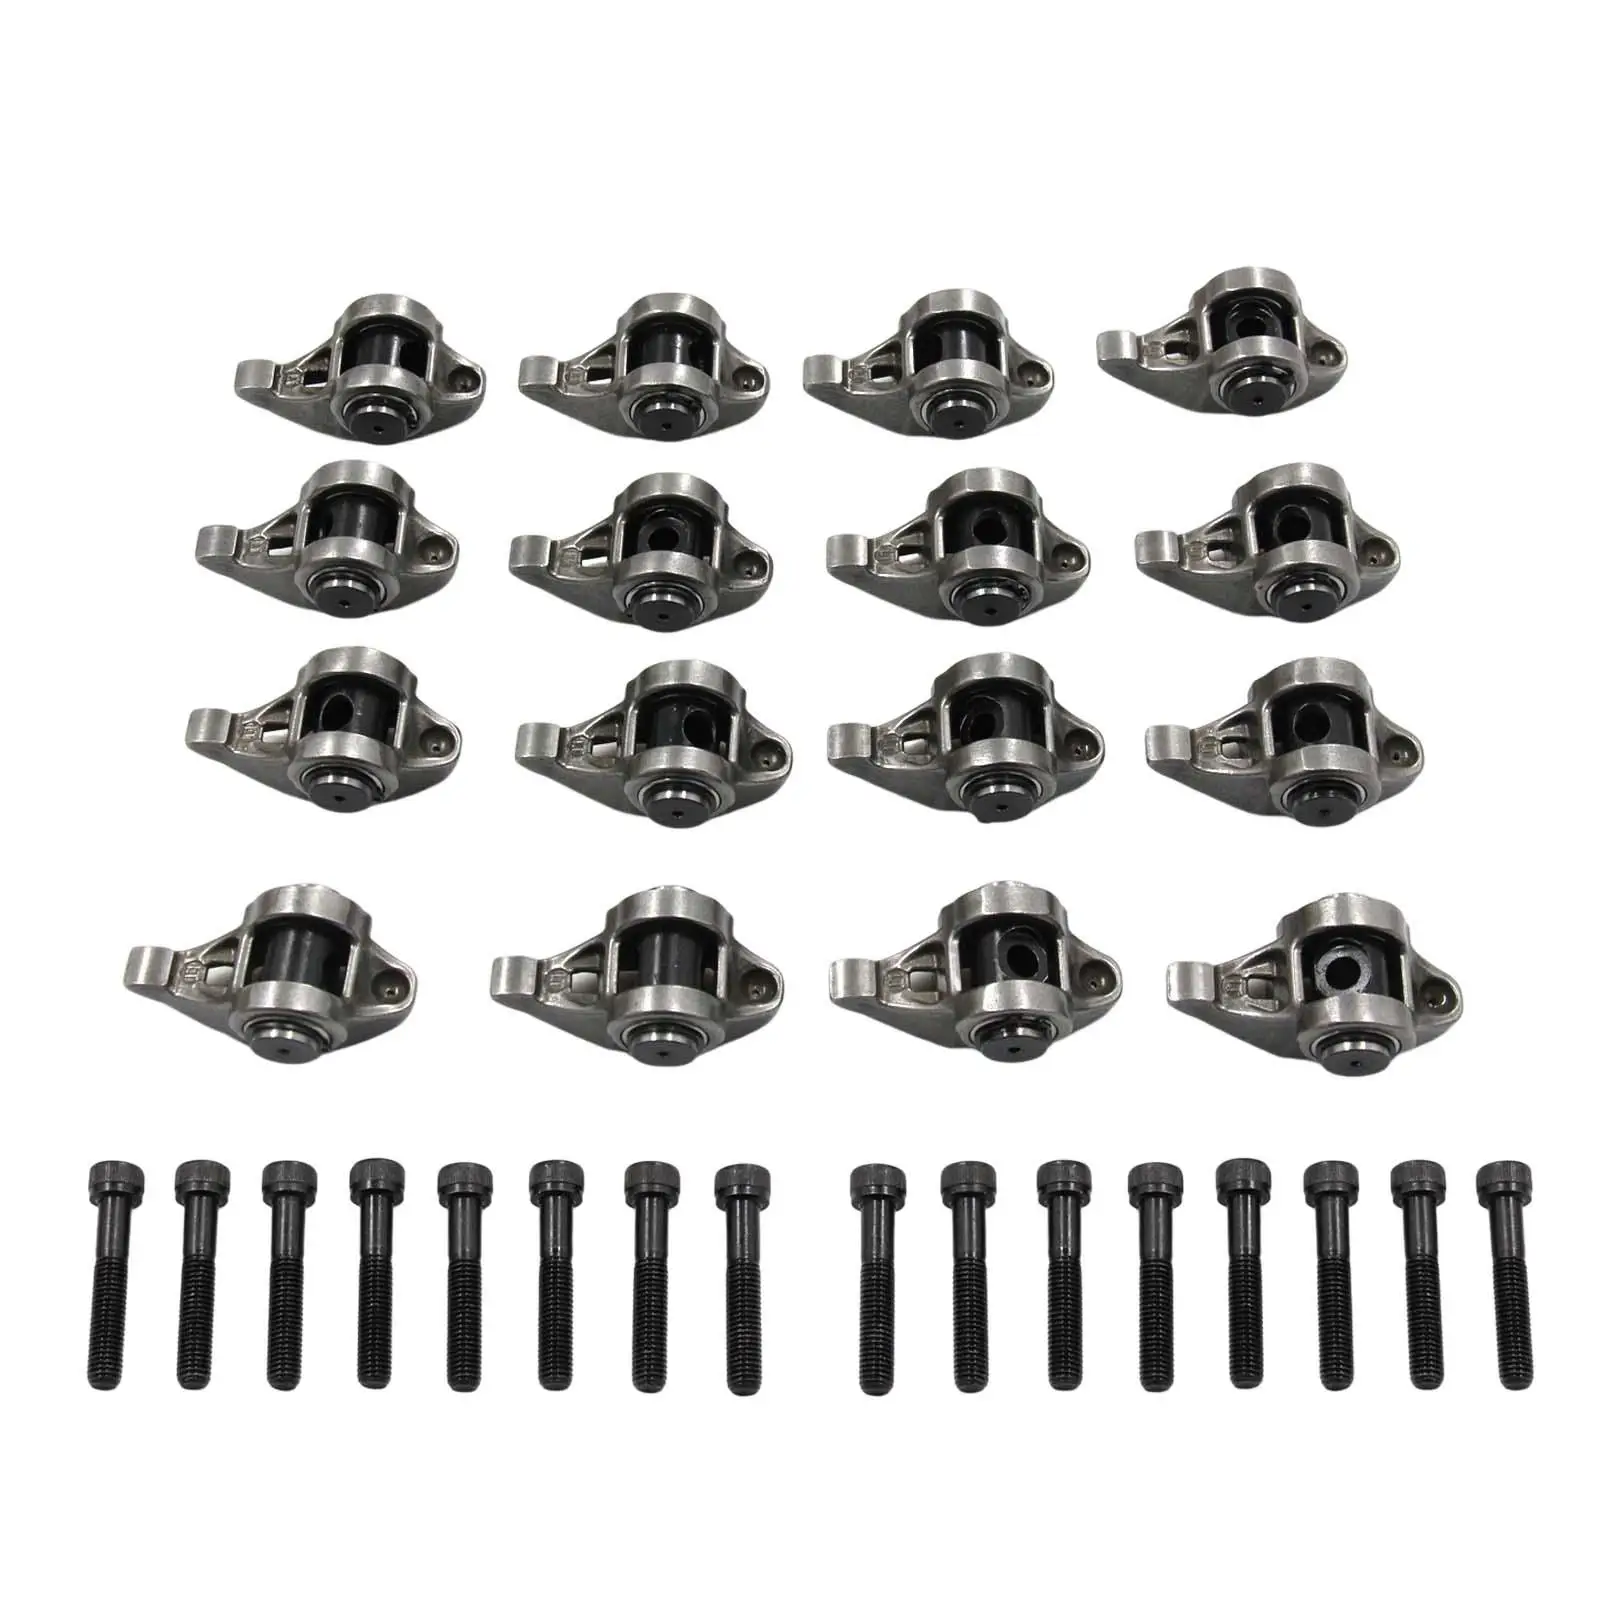 16x Rocker Arms and Bolts with Trunion Kit 10214664 Easy Installation for Chevrolet LS1 LS2 LS3 LS6 4.8 5.3 5.7 6.0 Engines